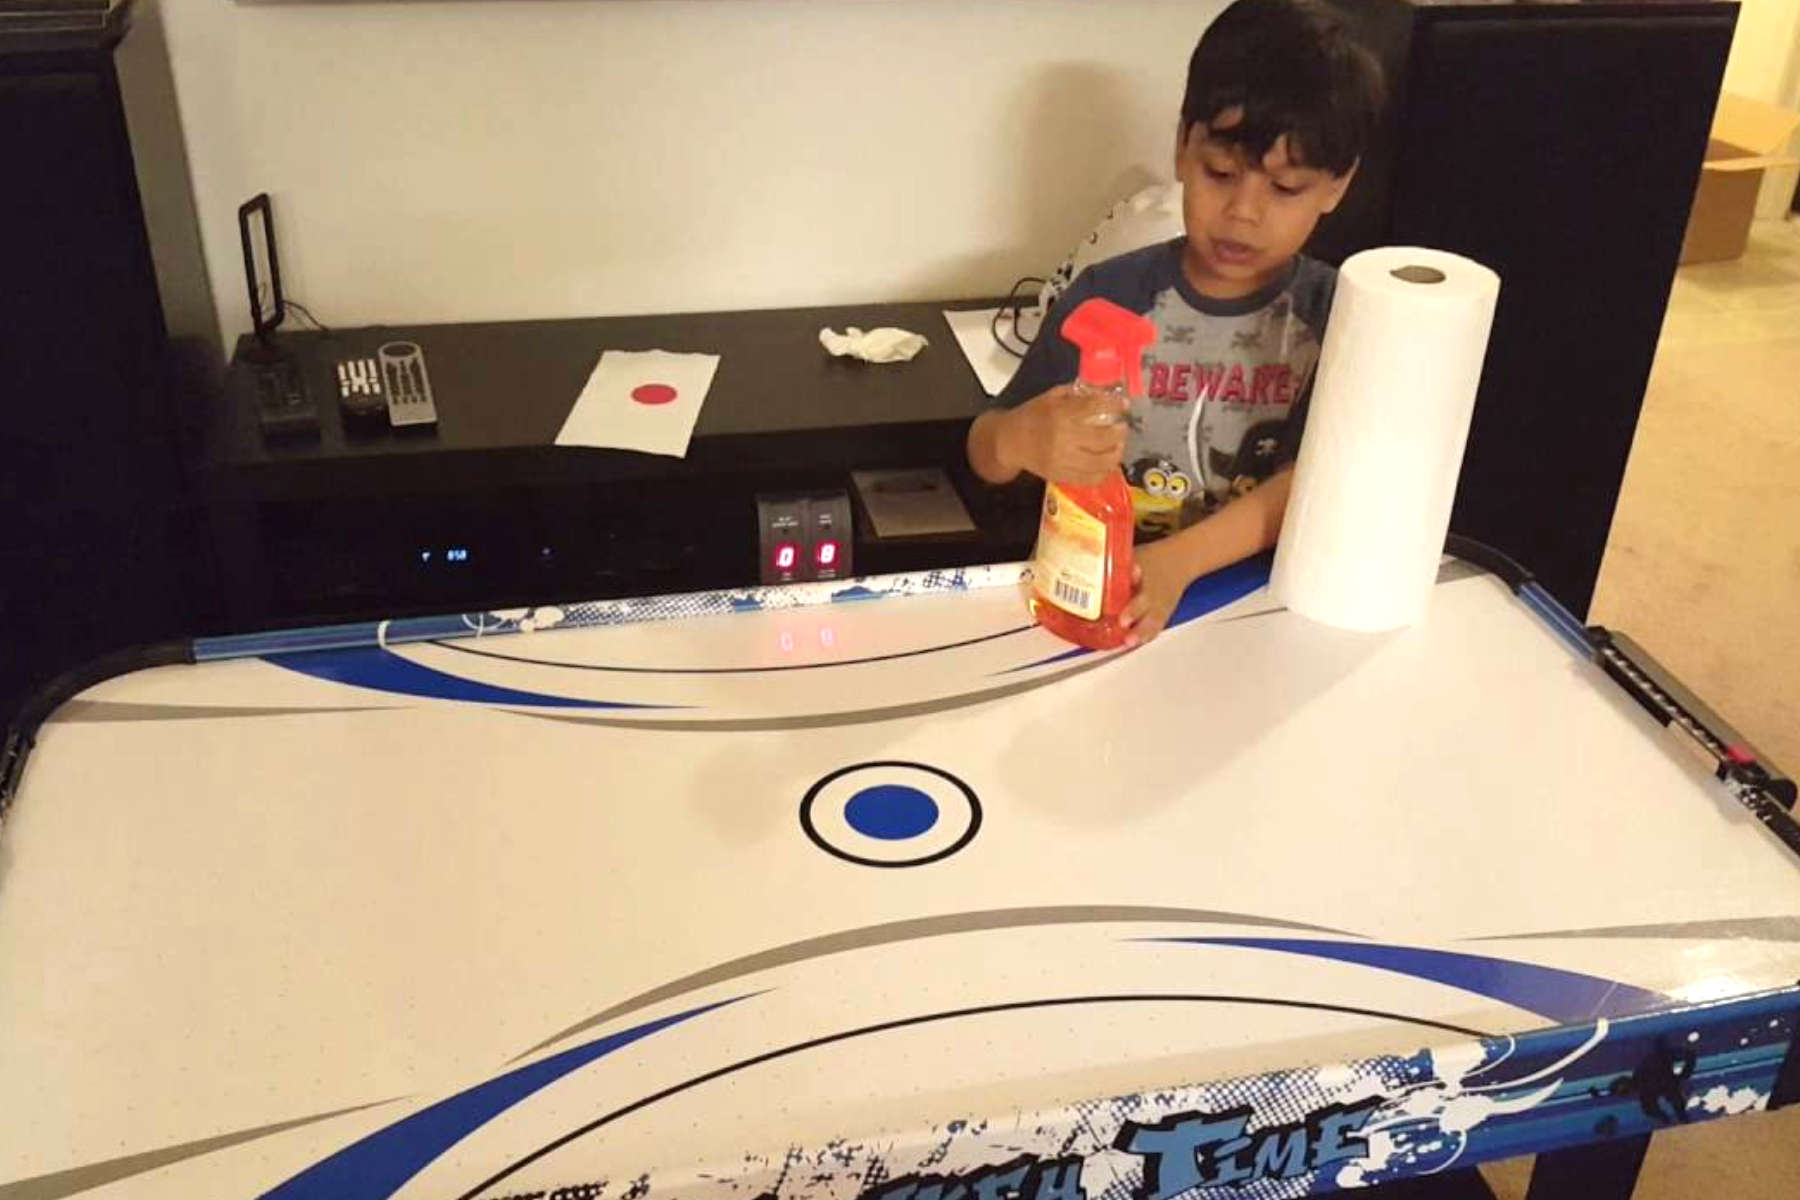 A child is seen wiping the surface of an Air Hockey table with a tissue and safety chemical